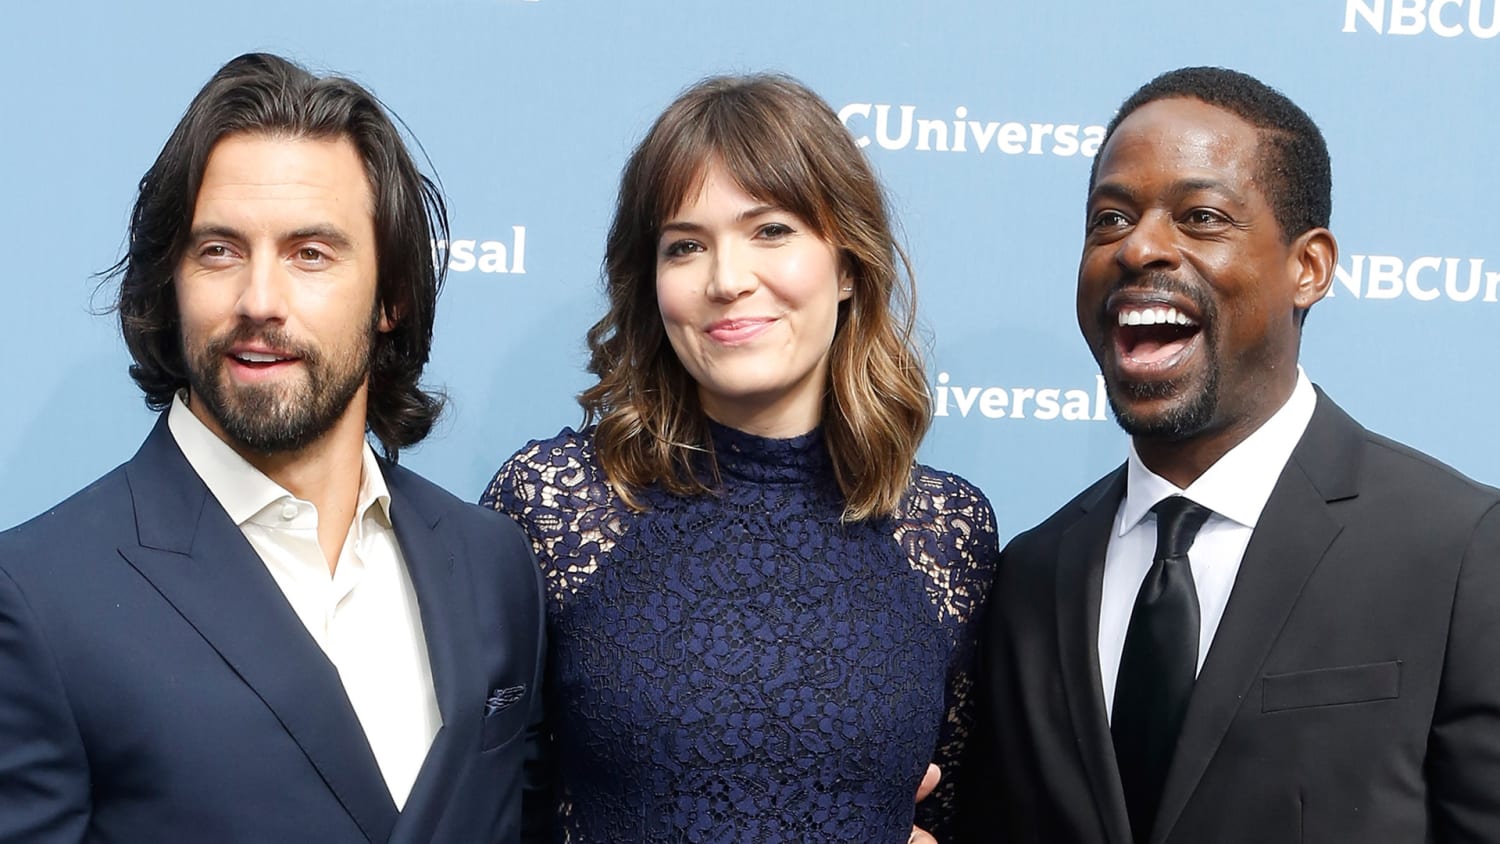 What the 'This Is Us' Cast Look Like In Real Life - This Is Us Cast Photos  of Mandy Moore, Milo Ventimiglia